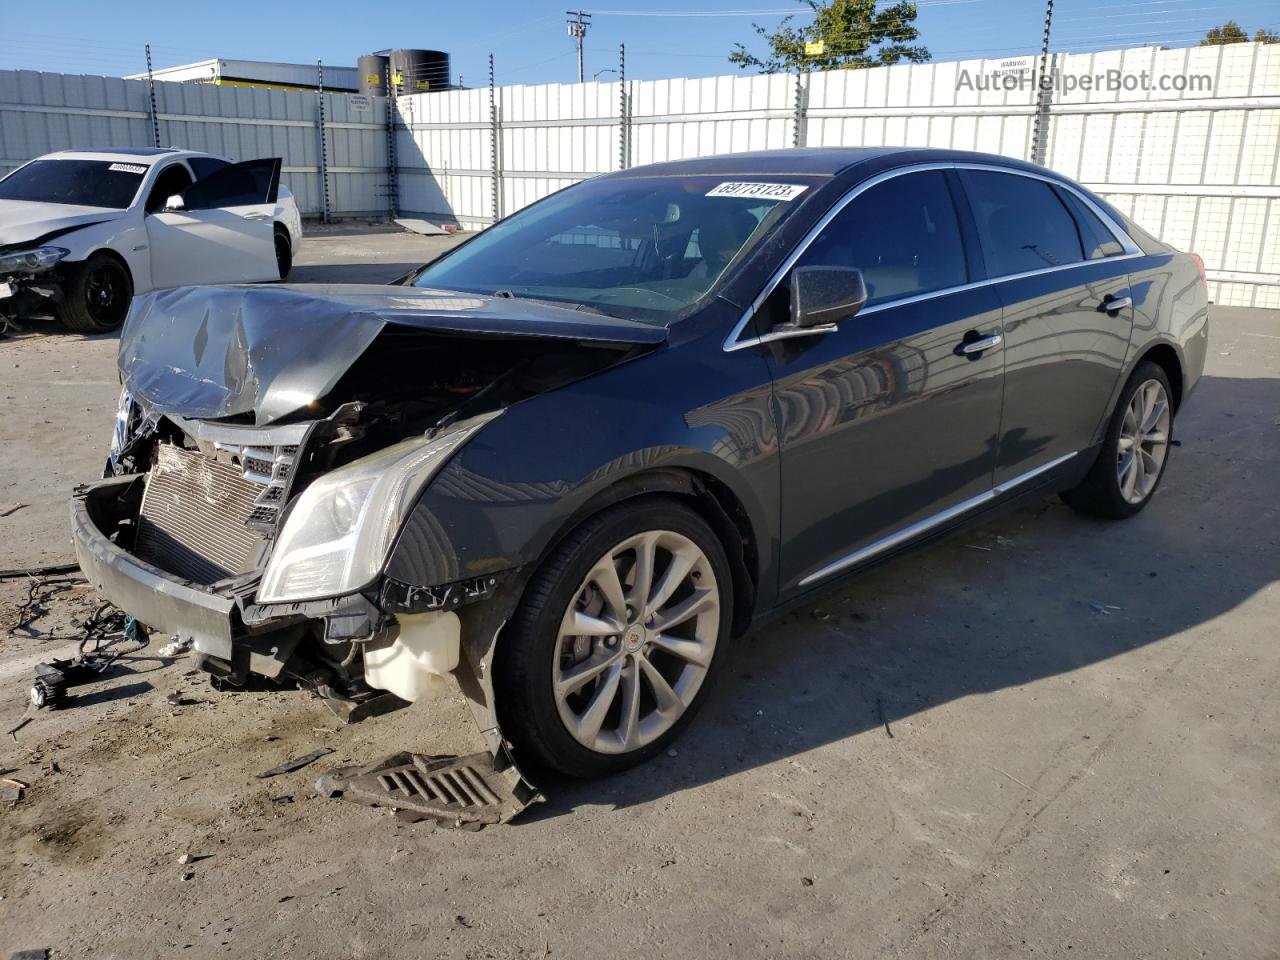 2013 Cadillac Xts Luxury Collection Blue vin: 2G61P5S36D9160838